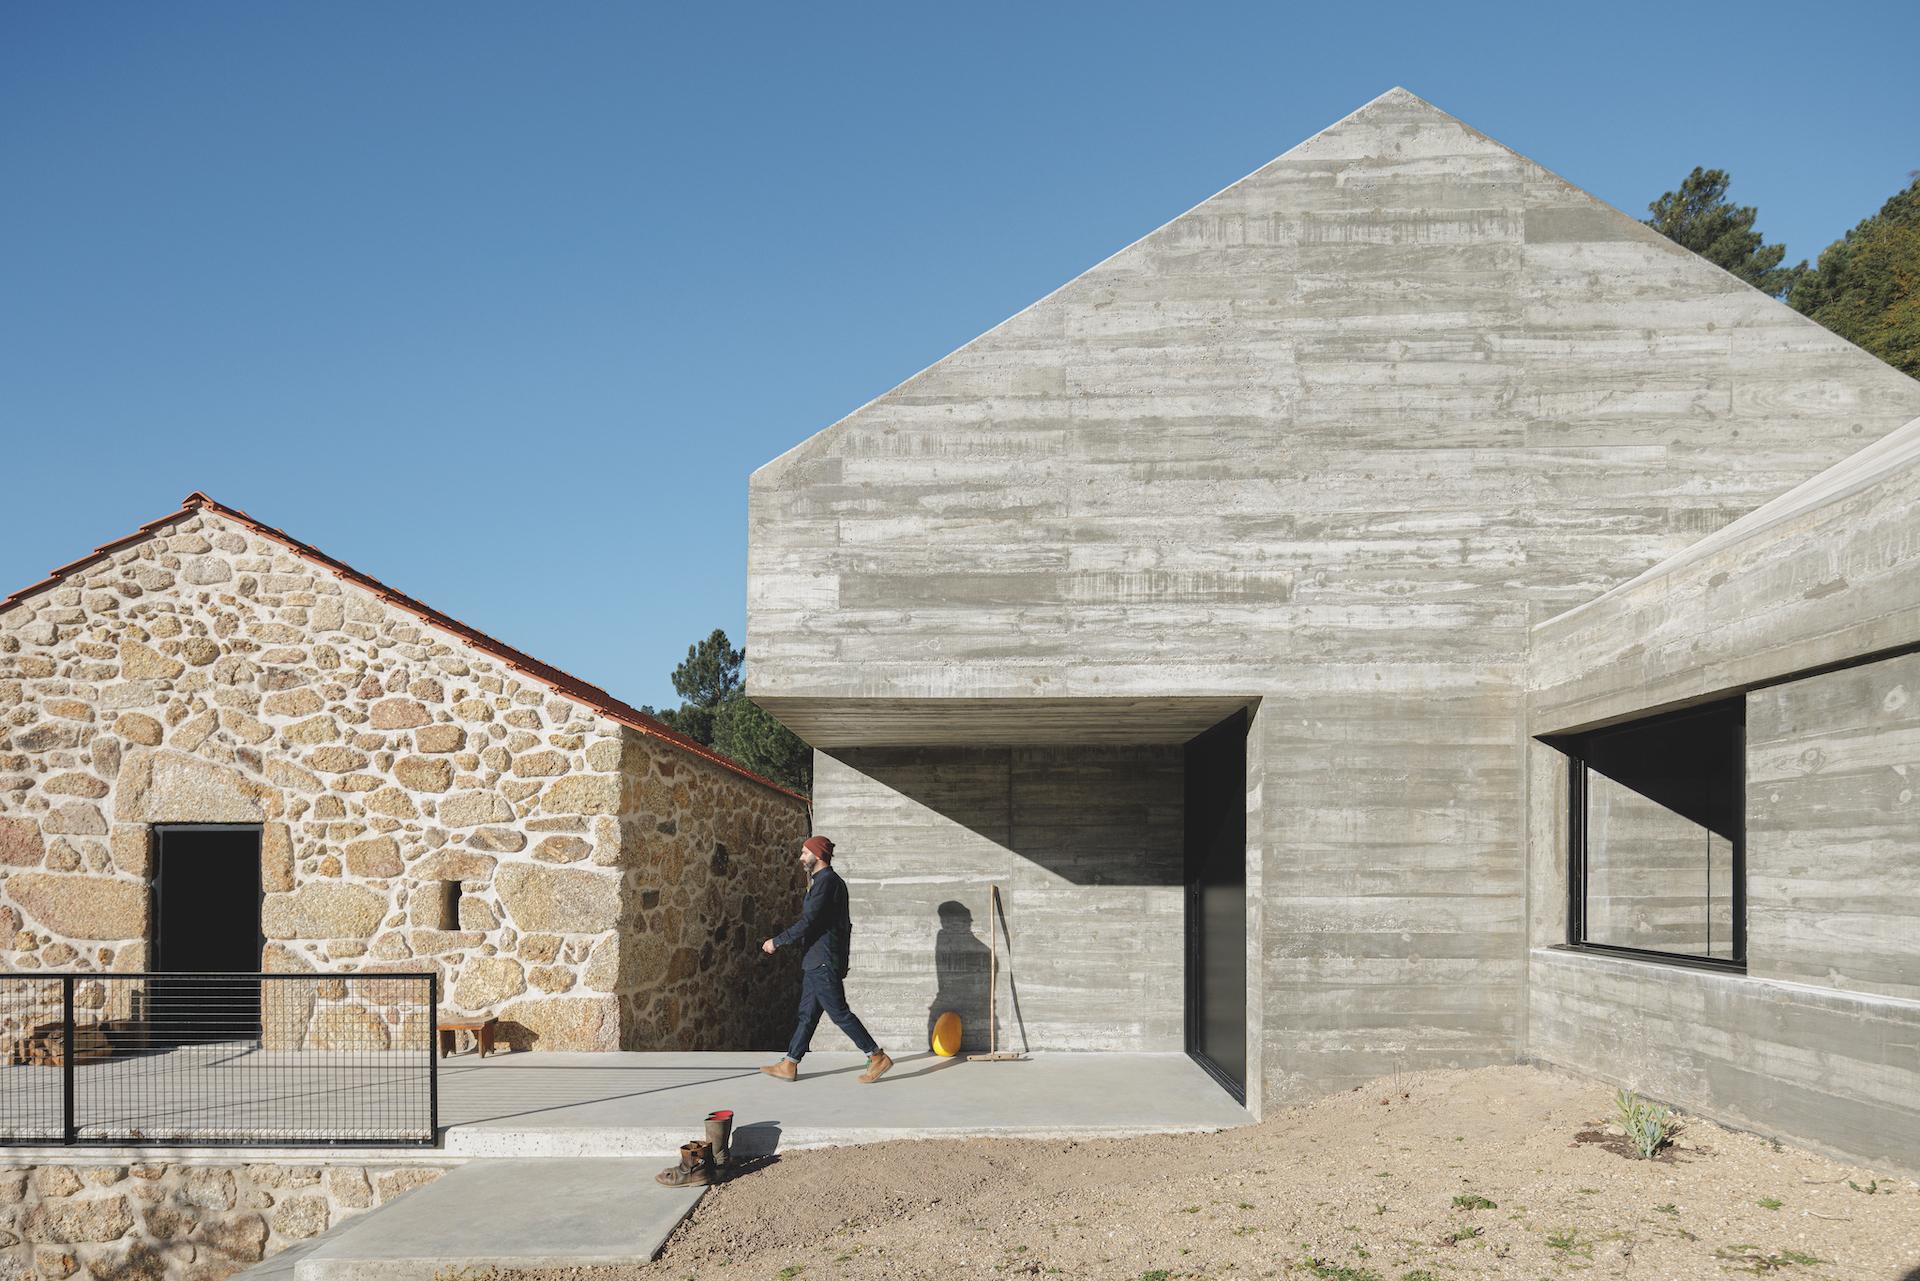 The Transformation of a Portugal Farmhouse into a Modern Family's Weekend Retreat